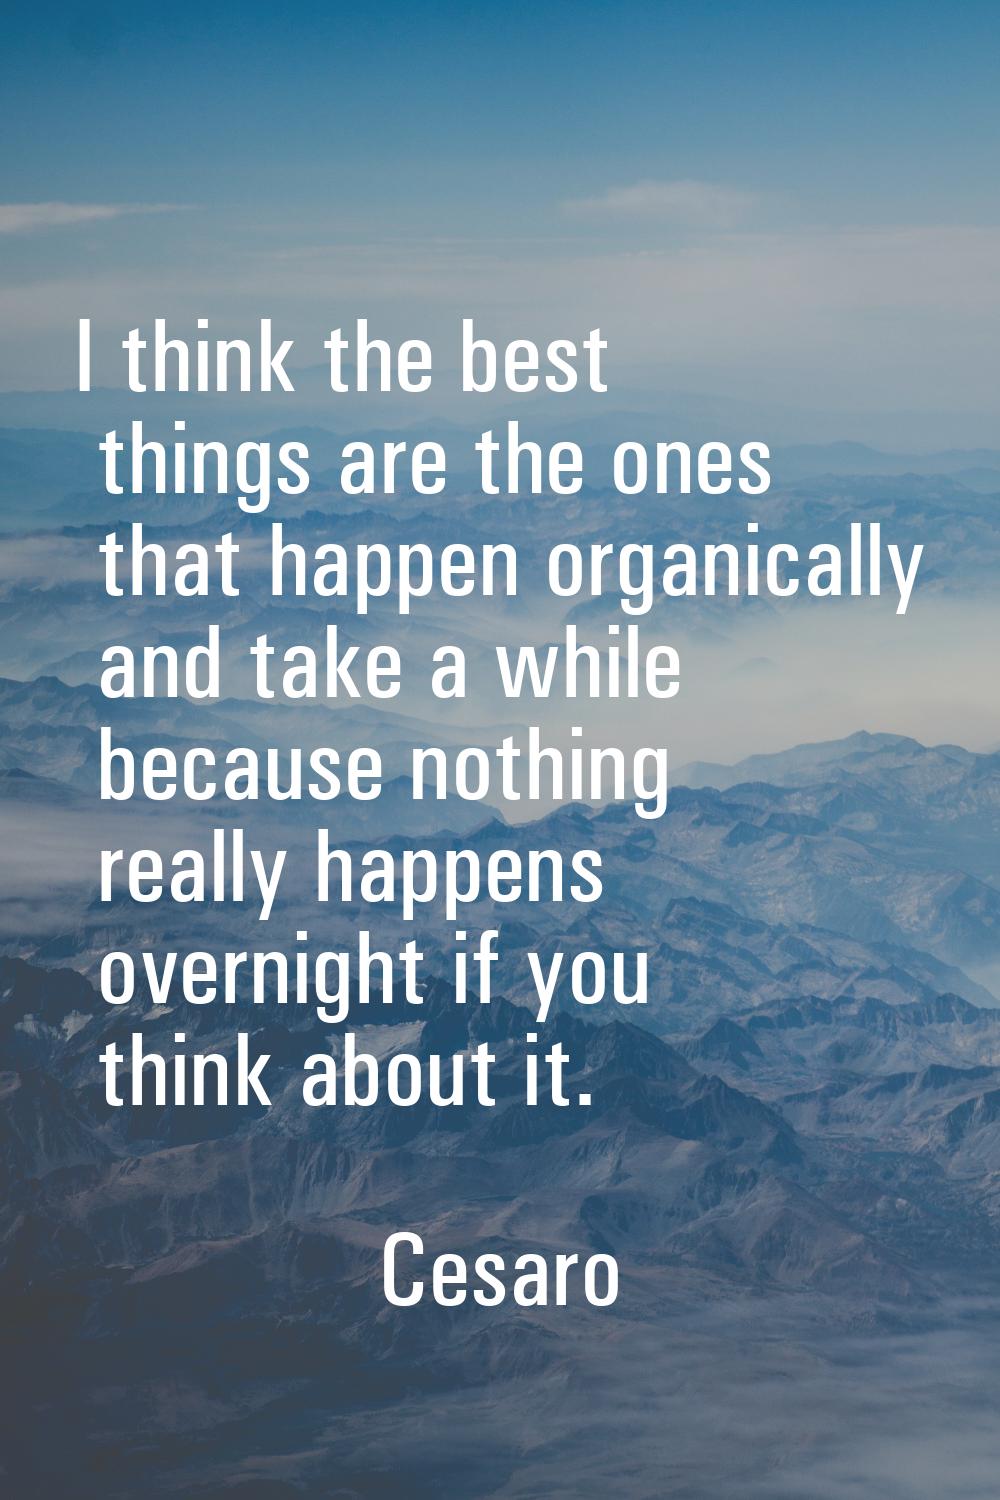 I think the best things are the ones that happen organically and take a while because nothing reall